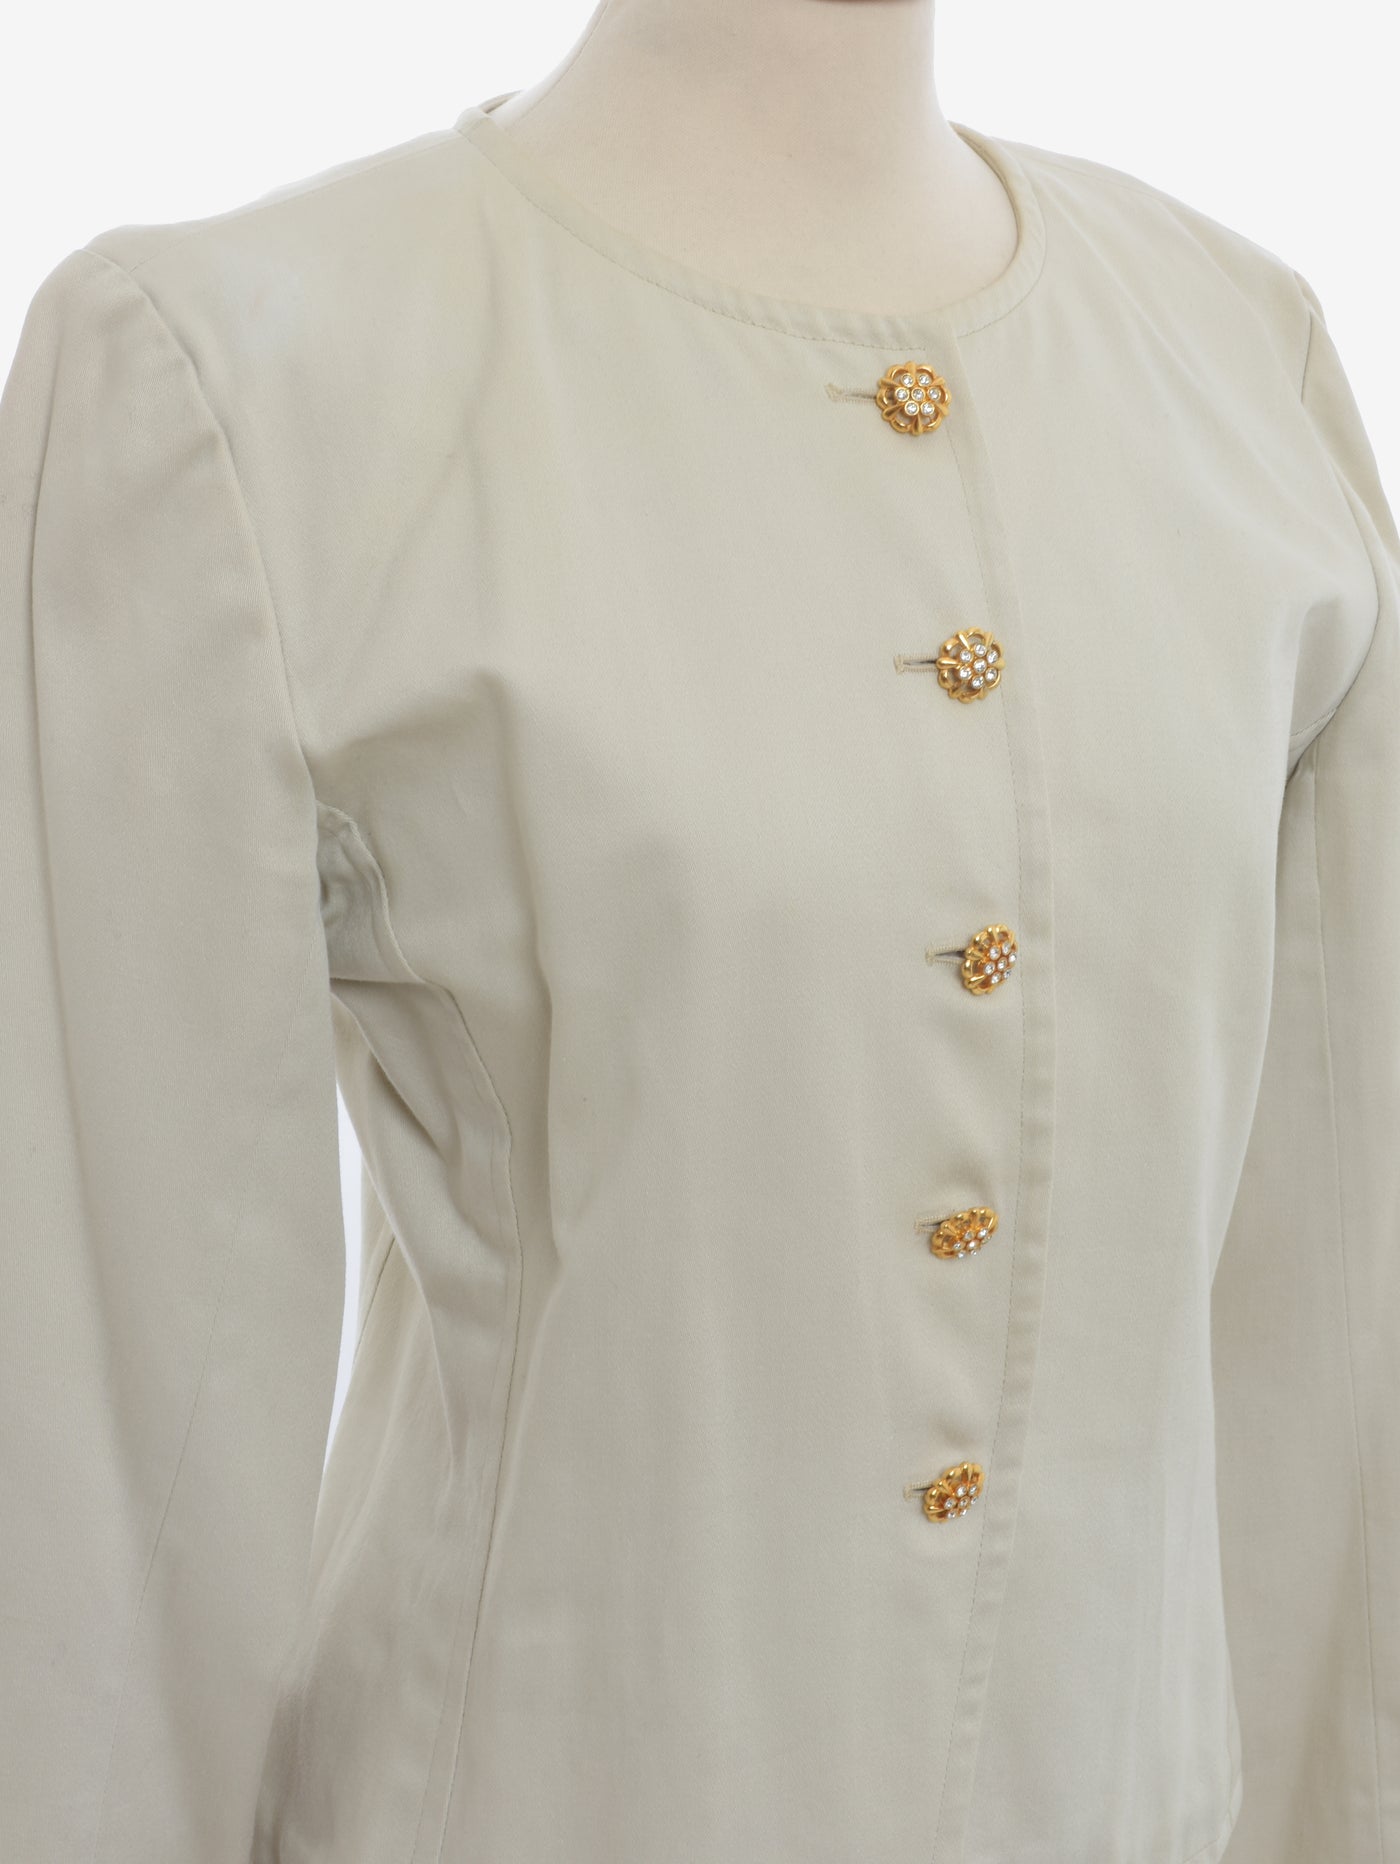 Yves Saint Laurent Blazer With Jeweled Buttons - 80s